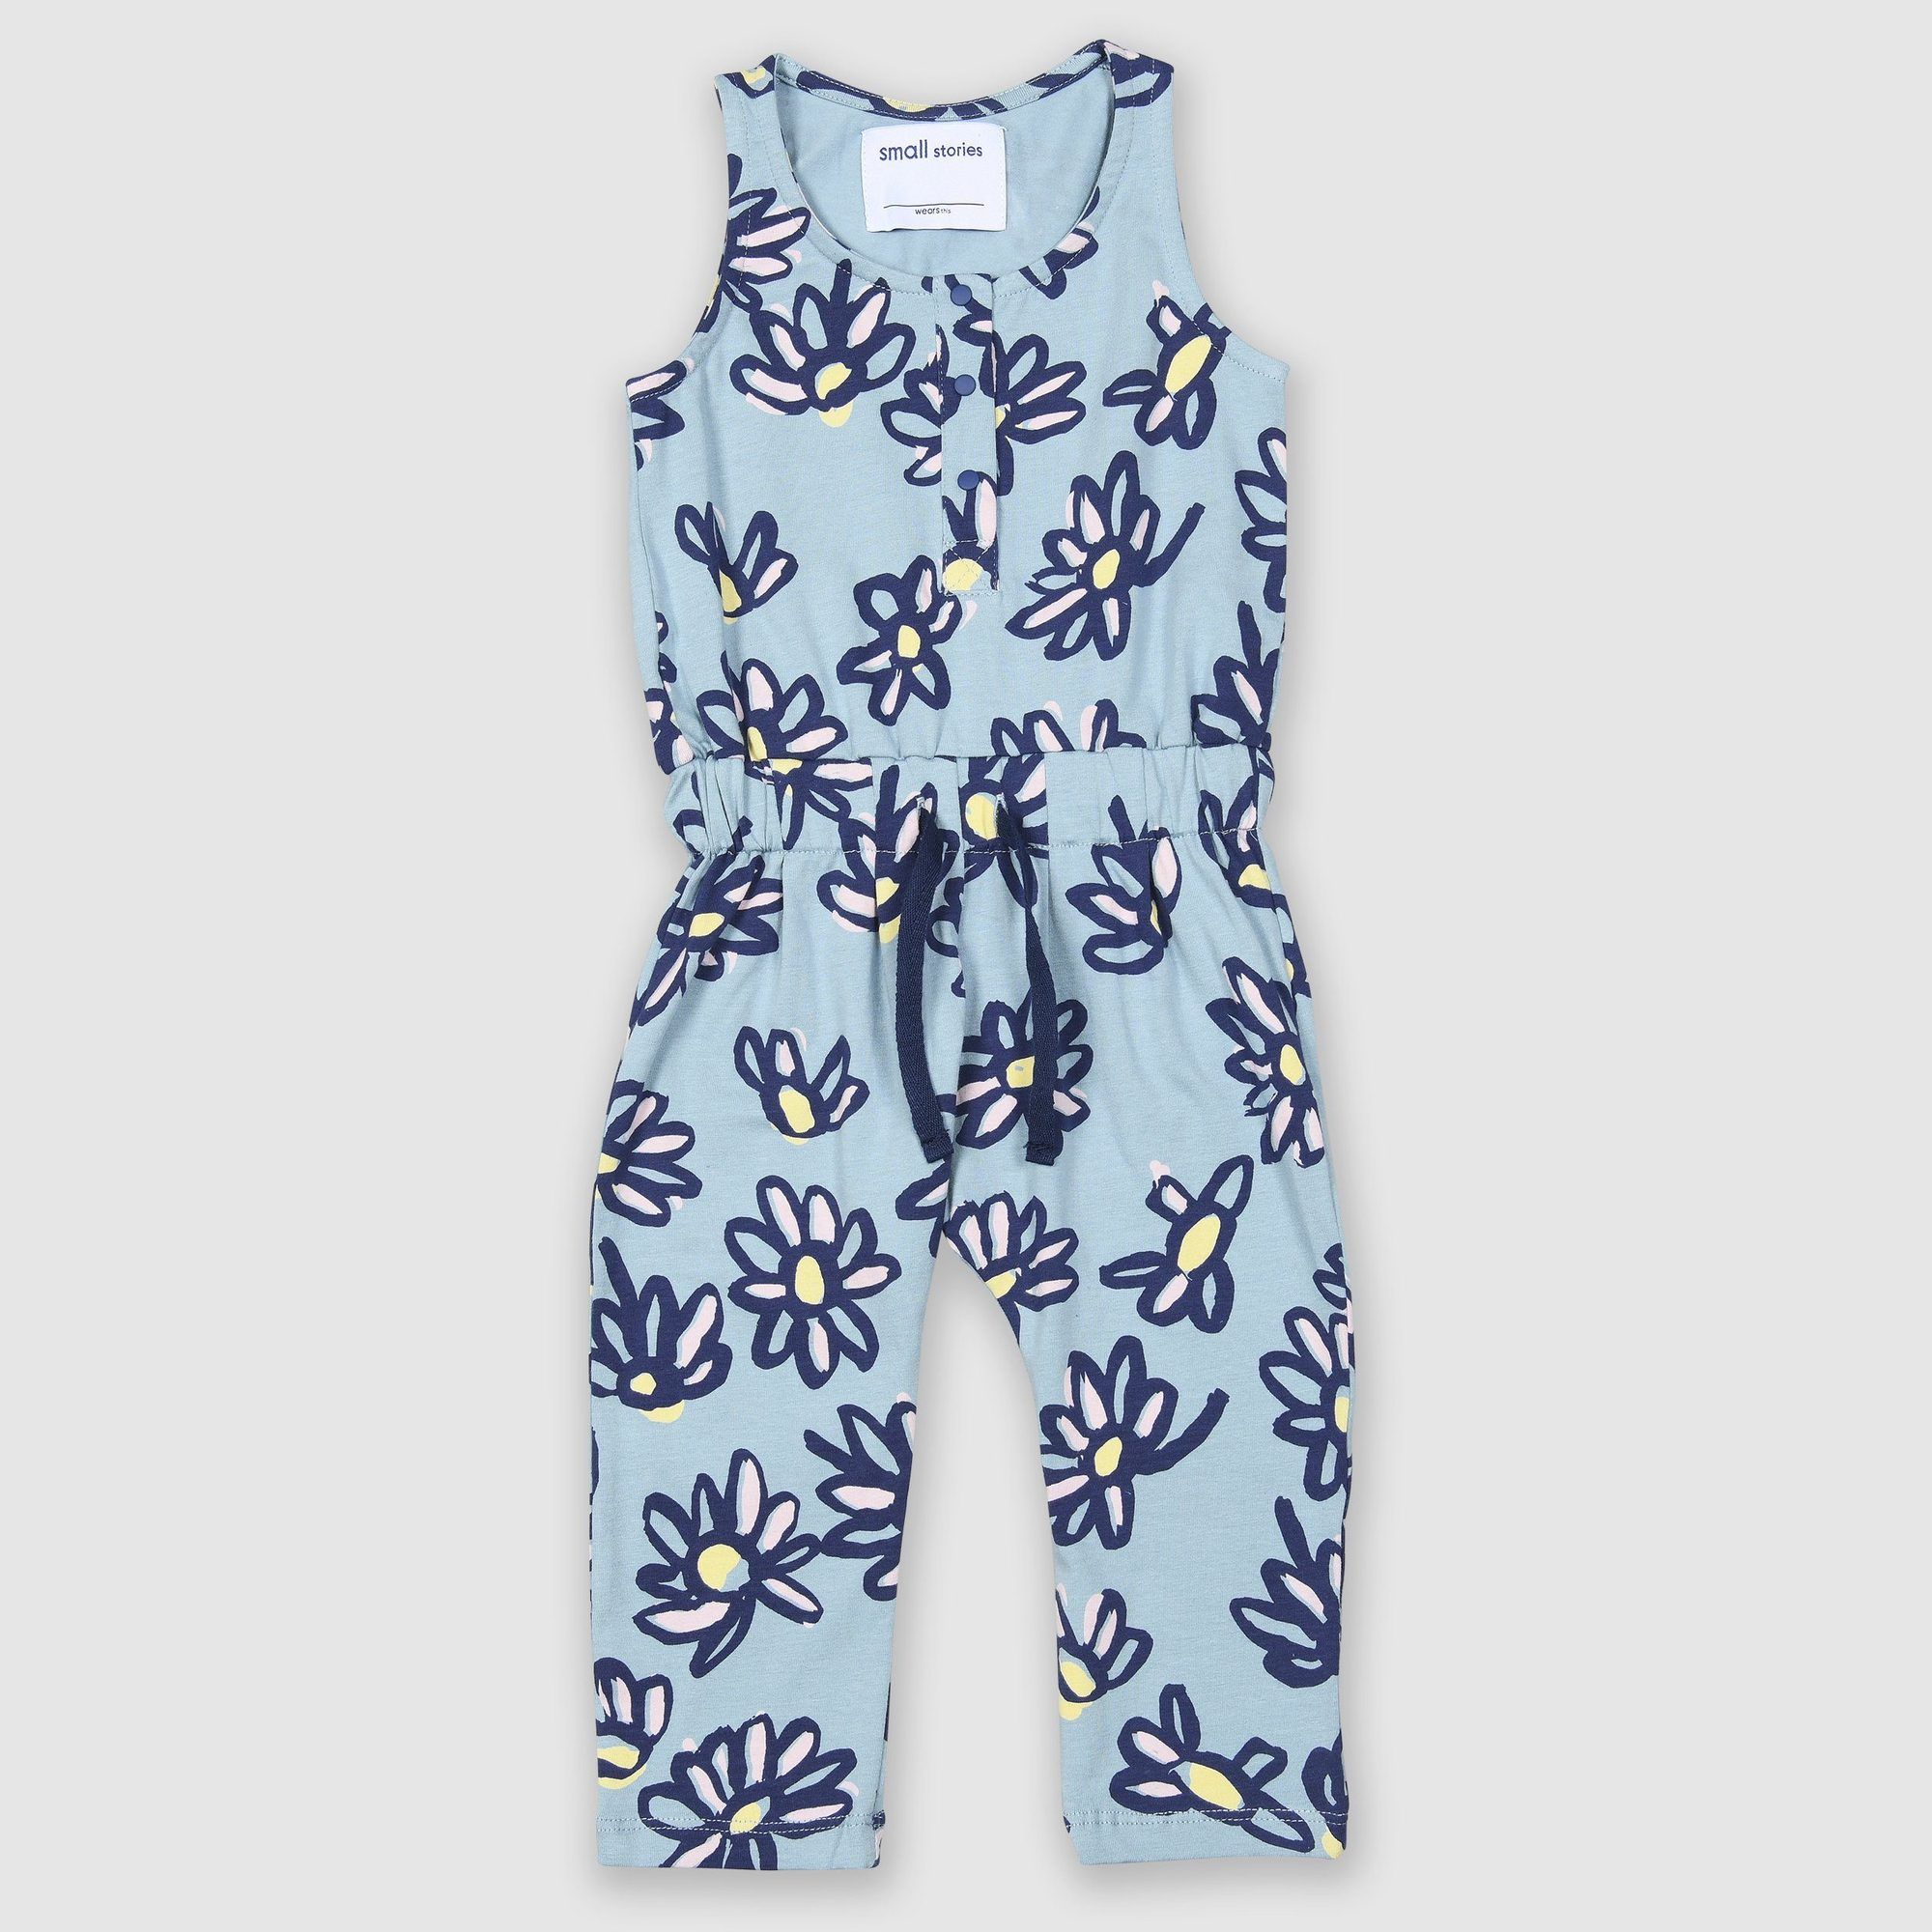 Sleeveless elasticated waisted jumpsuit in our painted floral print in pale blue with highlights of yellow and pink. Made from super soft stretchy cotton.